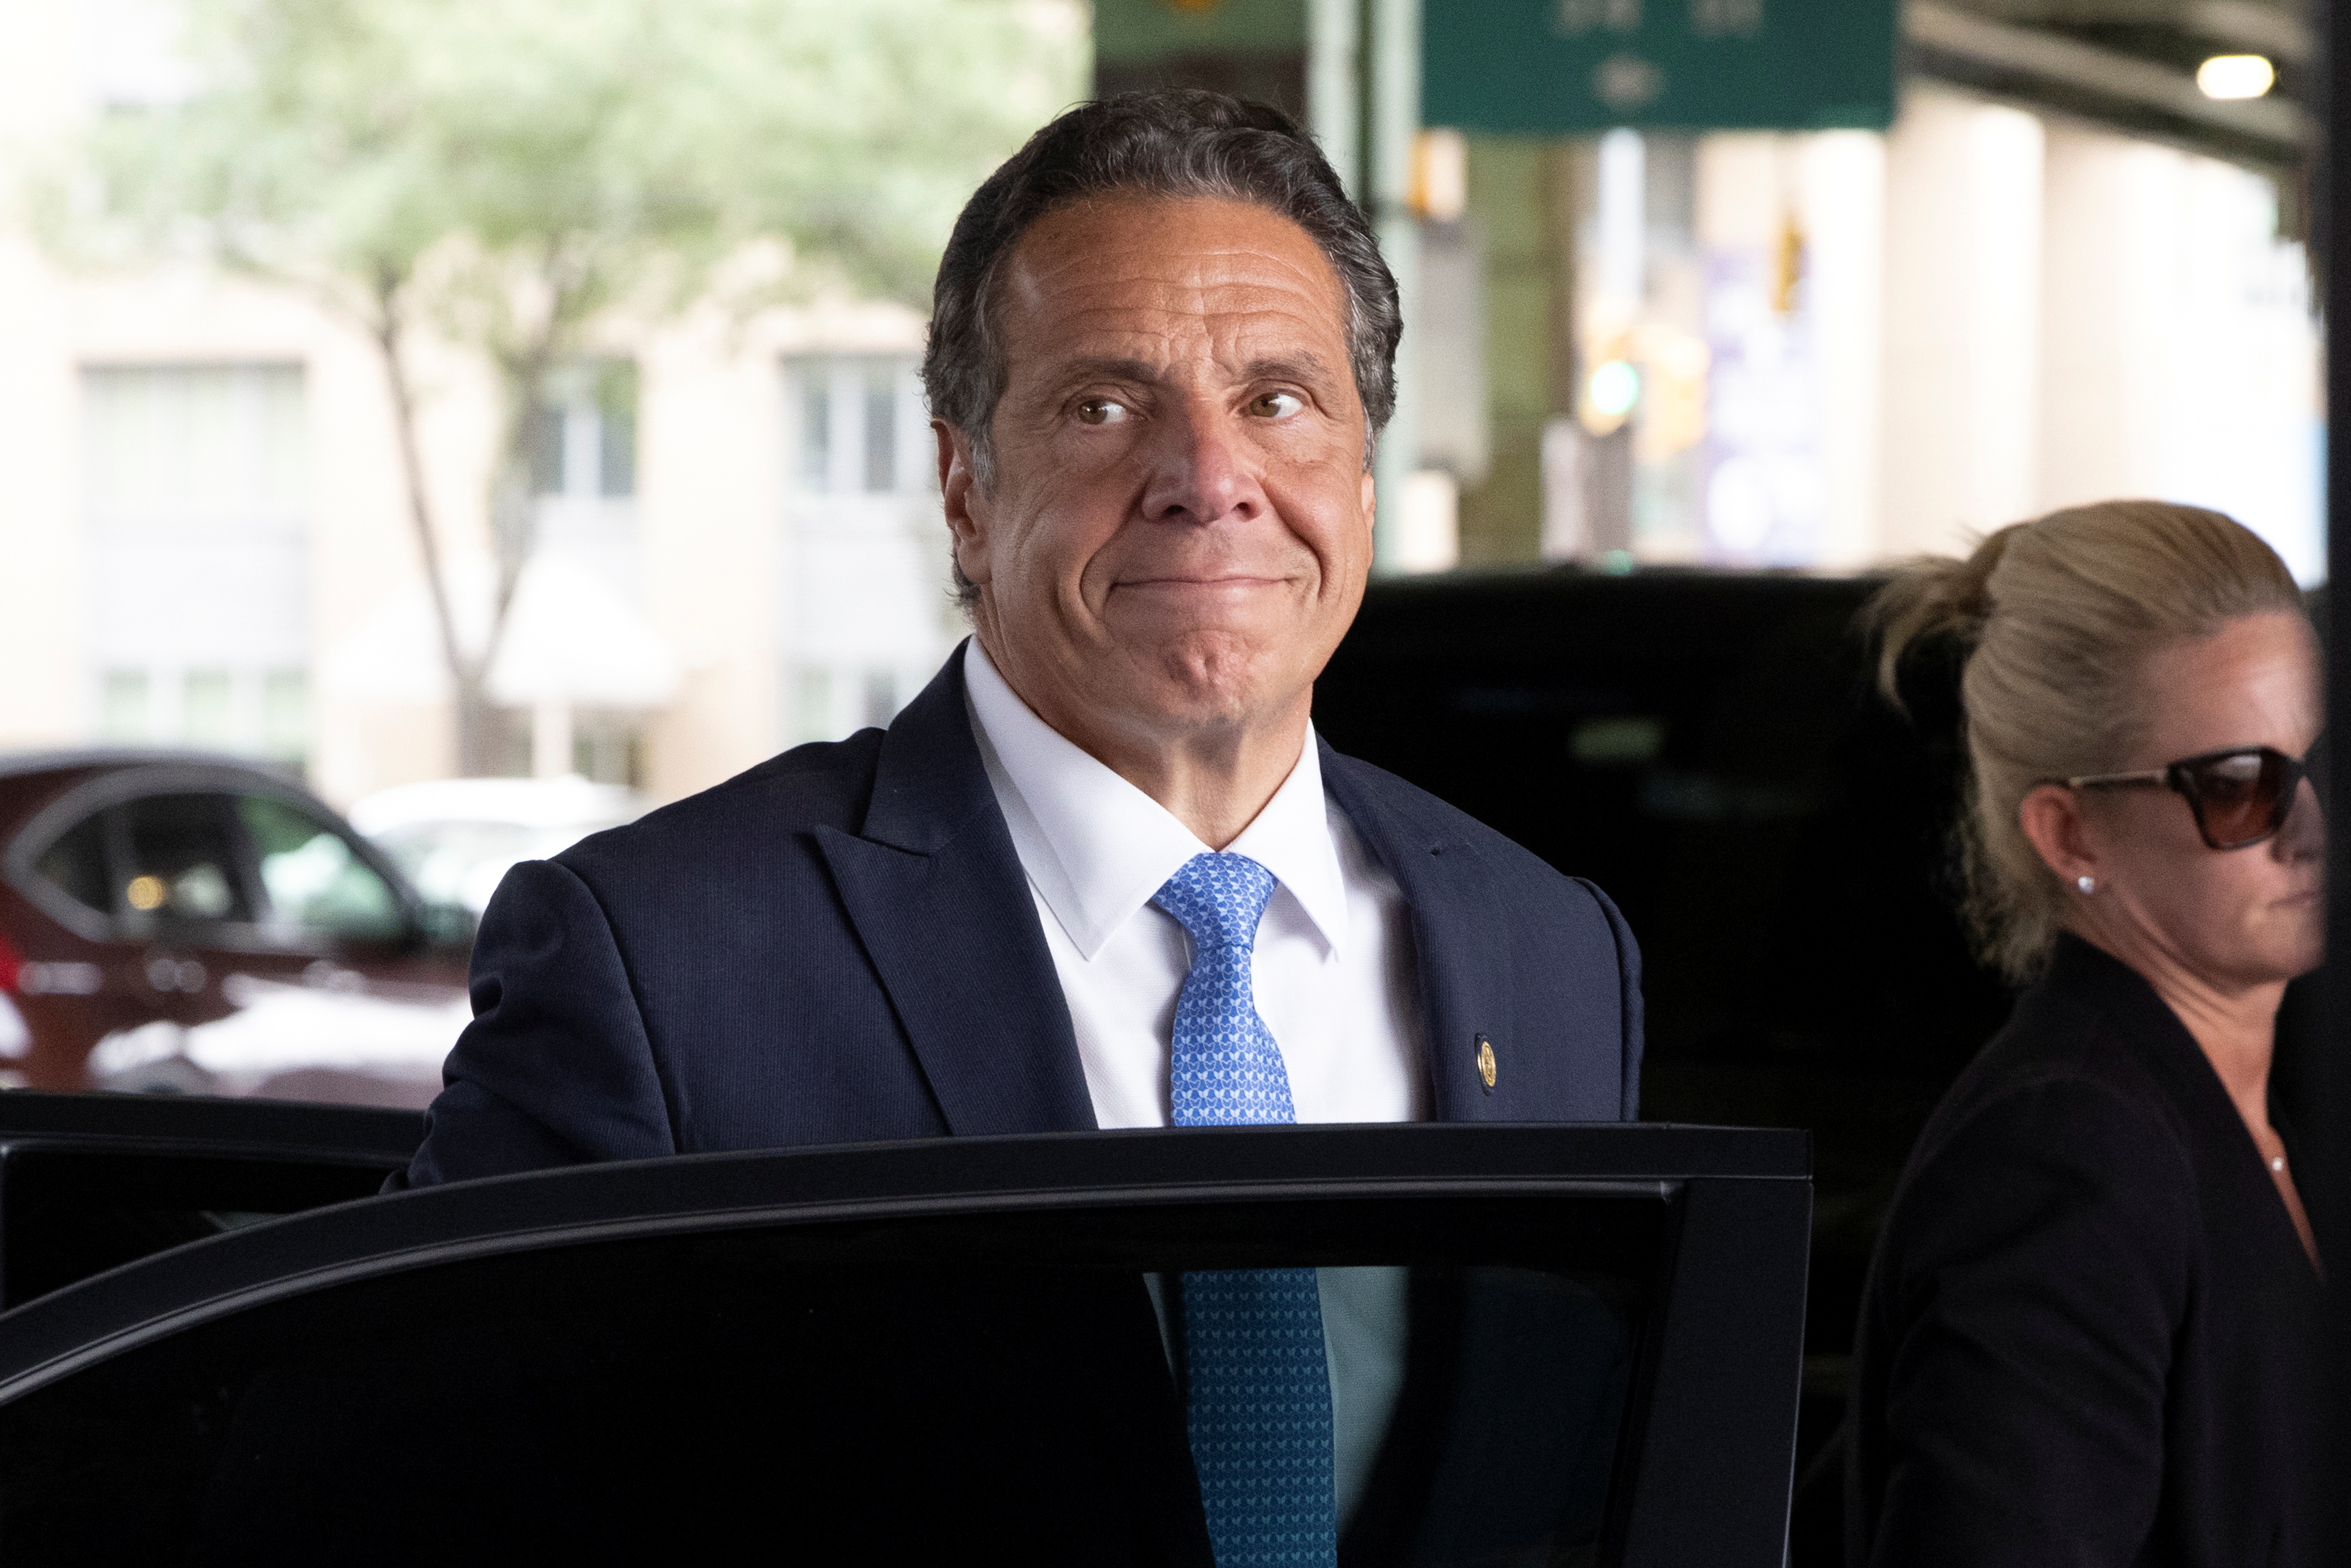 New York Governor Andrew Cuomo arrives to depart in his helicopter after announcing his resignation in Manhattan, New York City